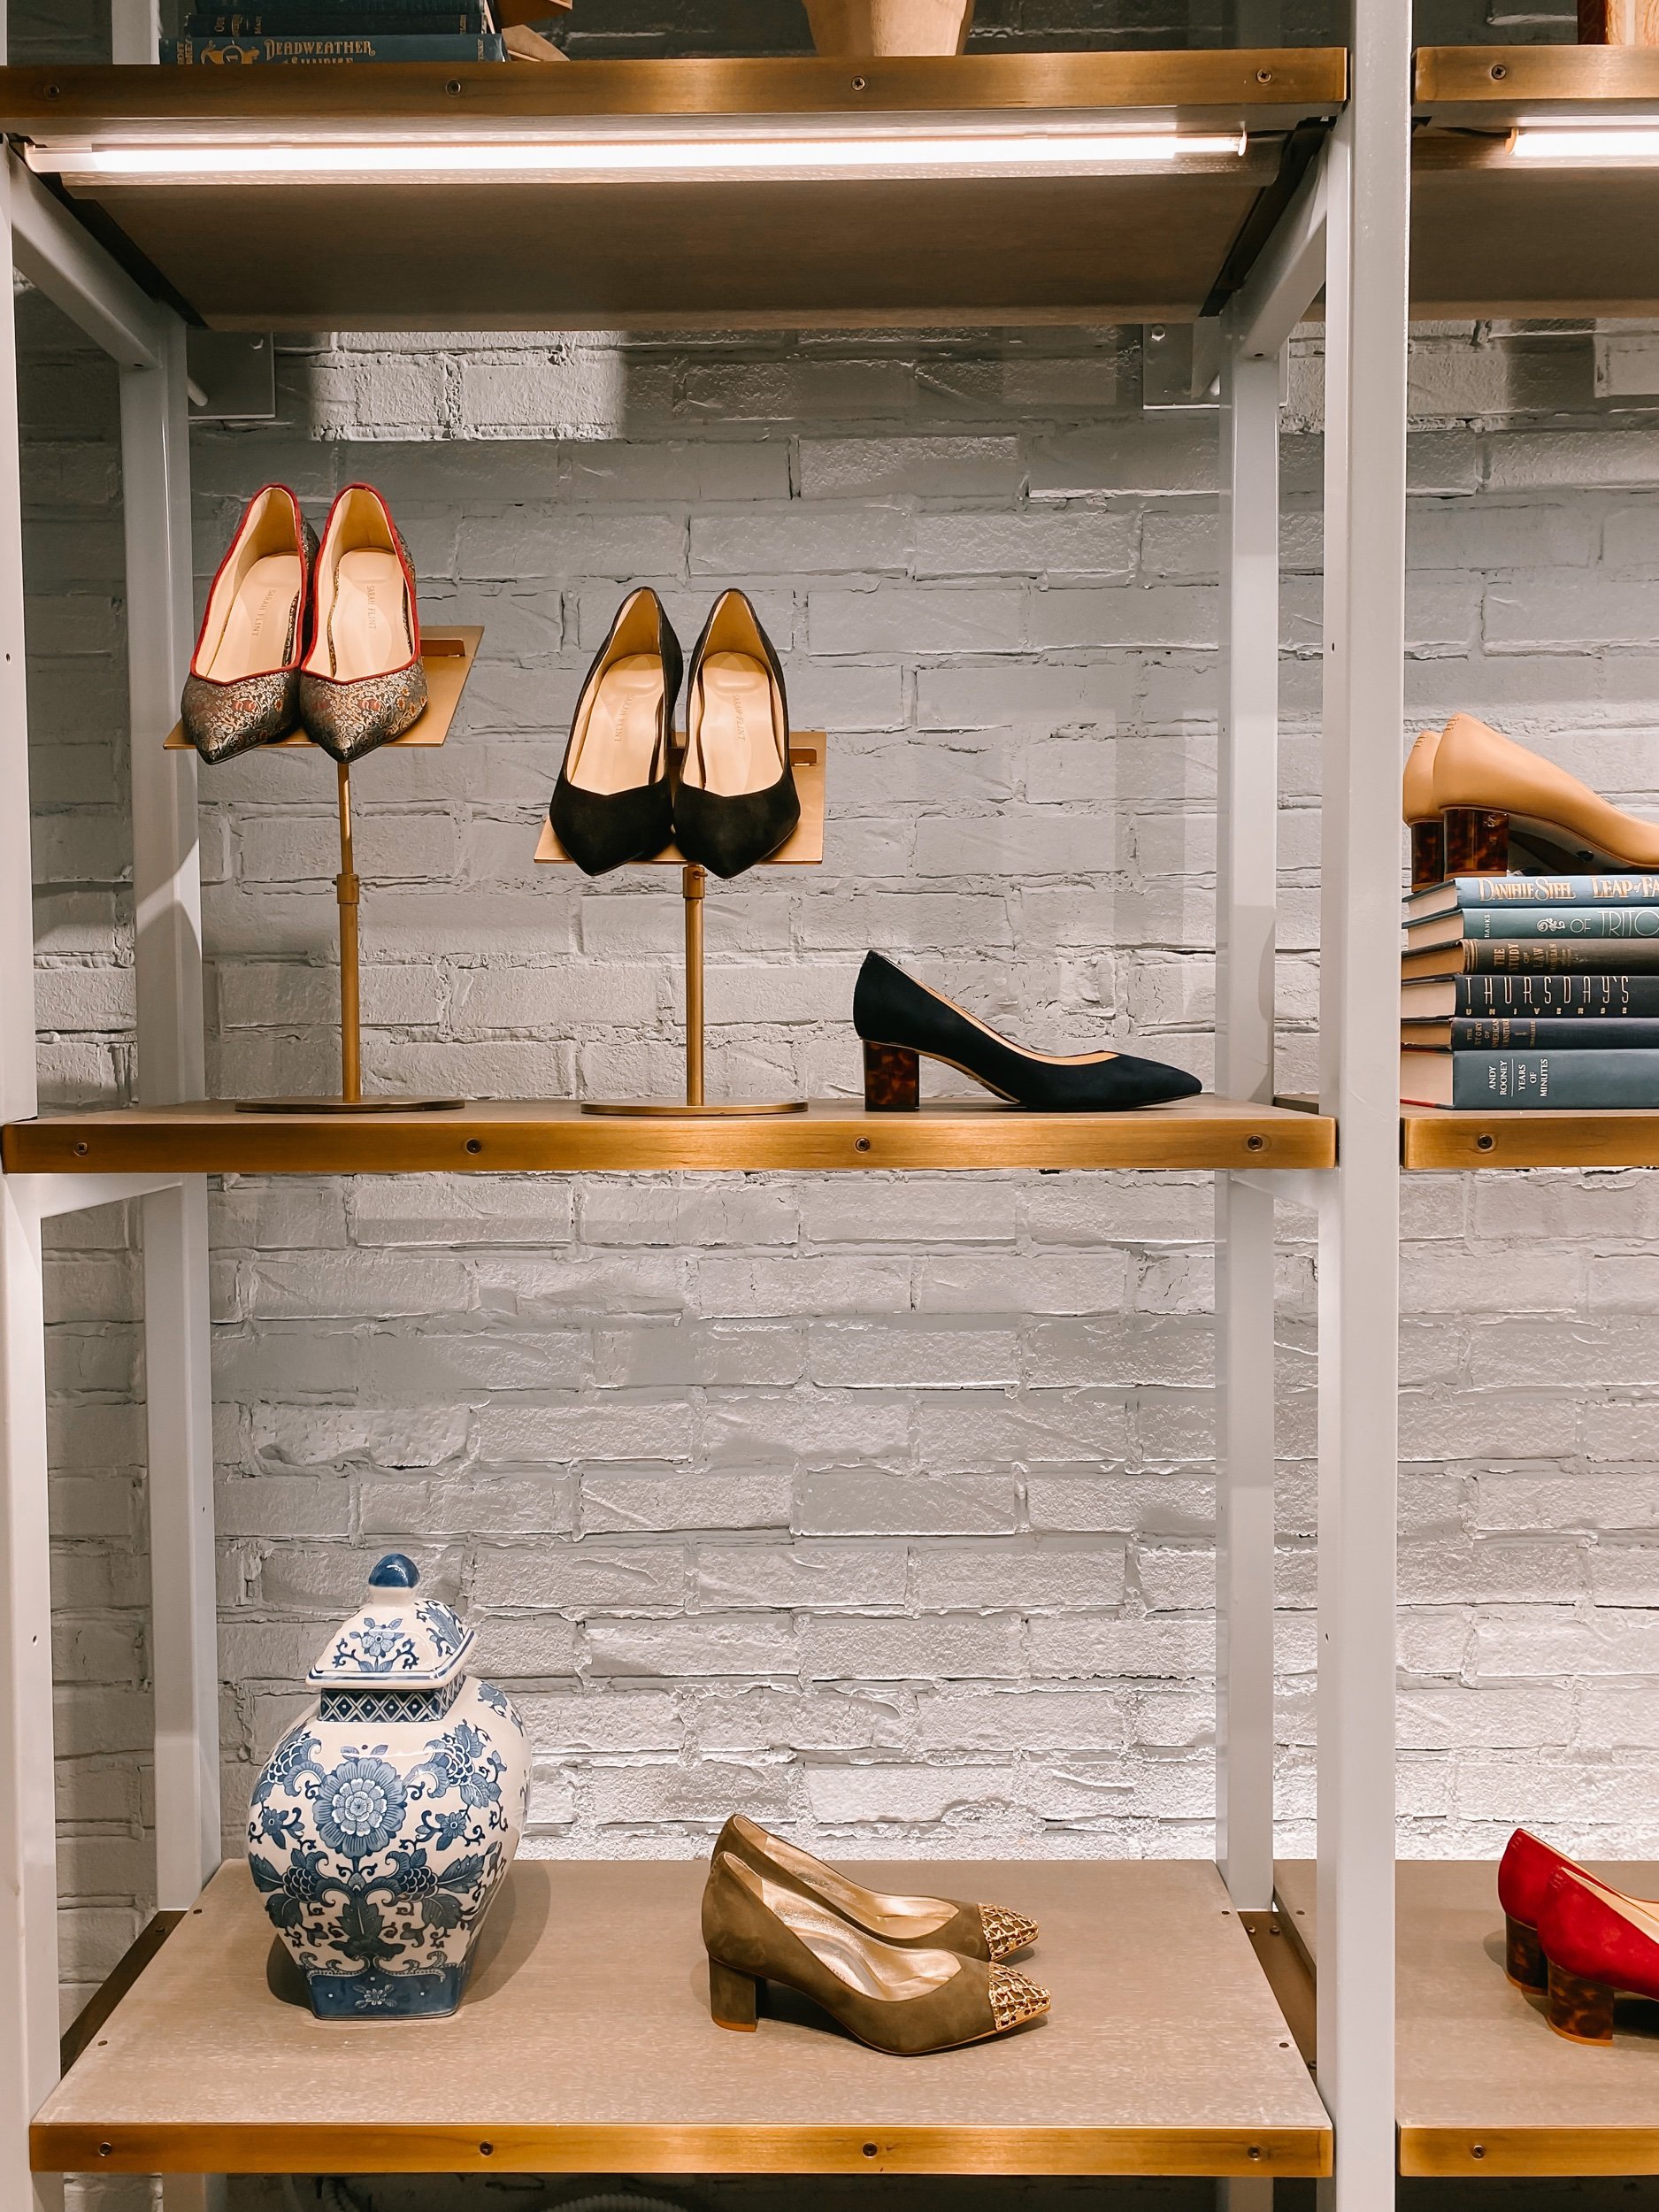 Three Heel Clicks - Picking Out New Shoes at the Sarah Flint Dallas Pop-Up Store